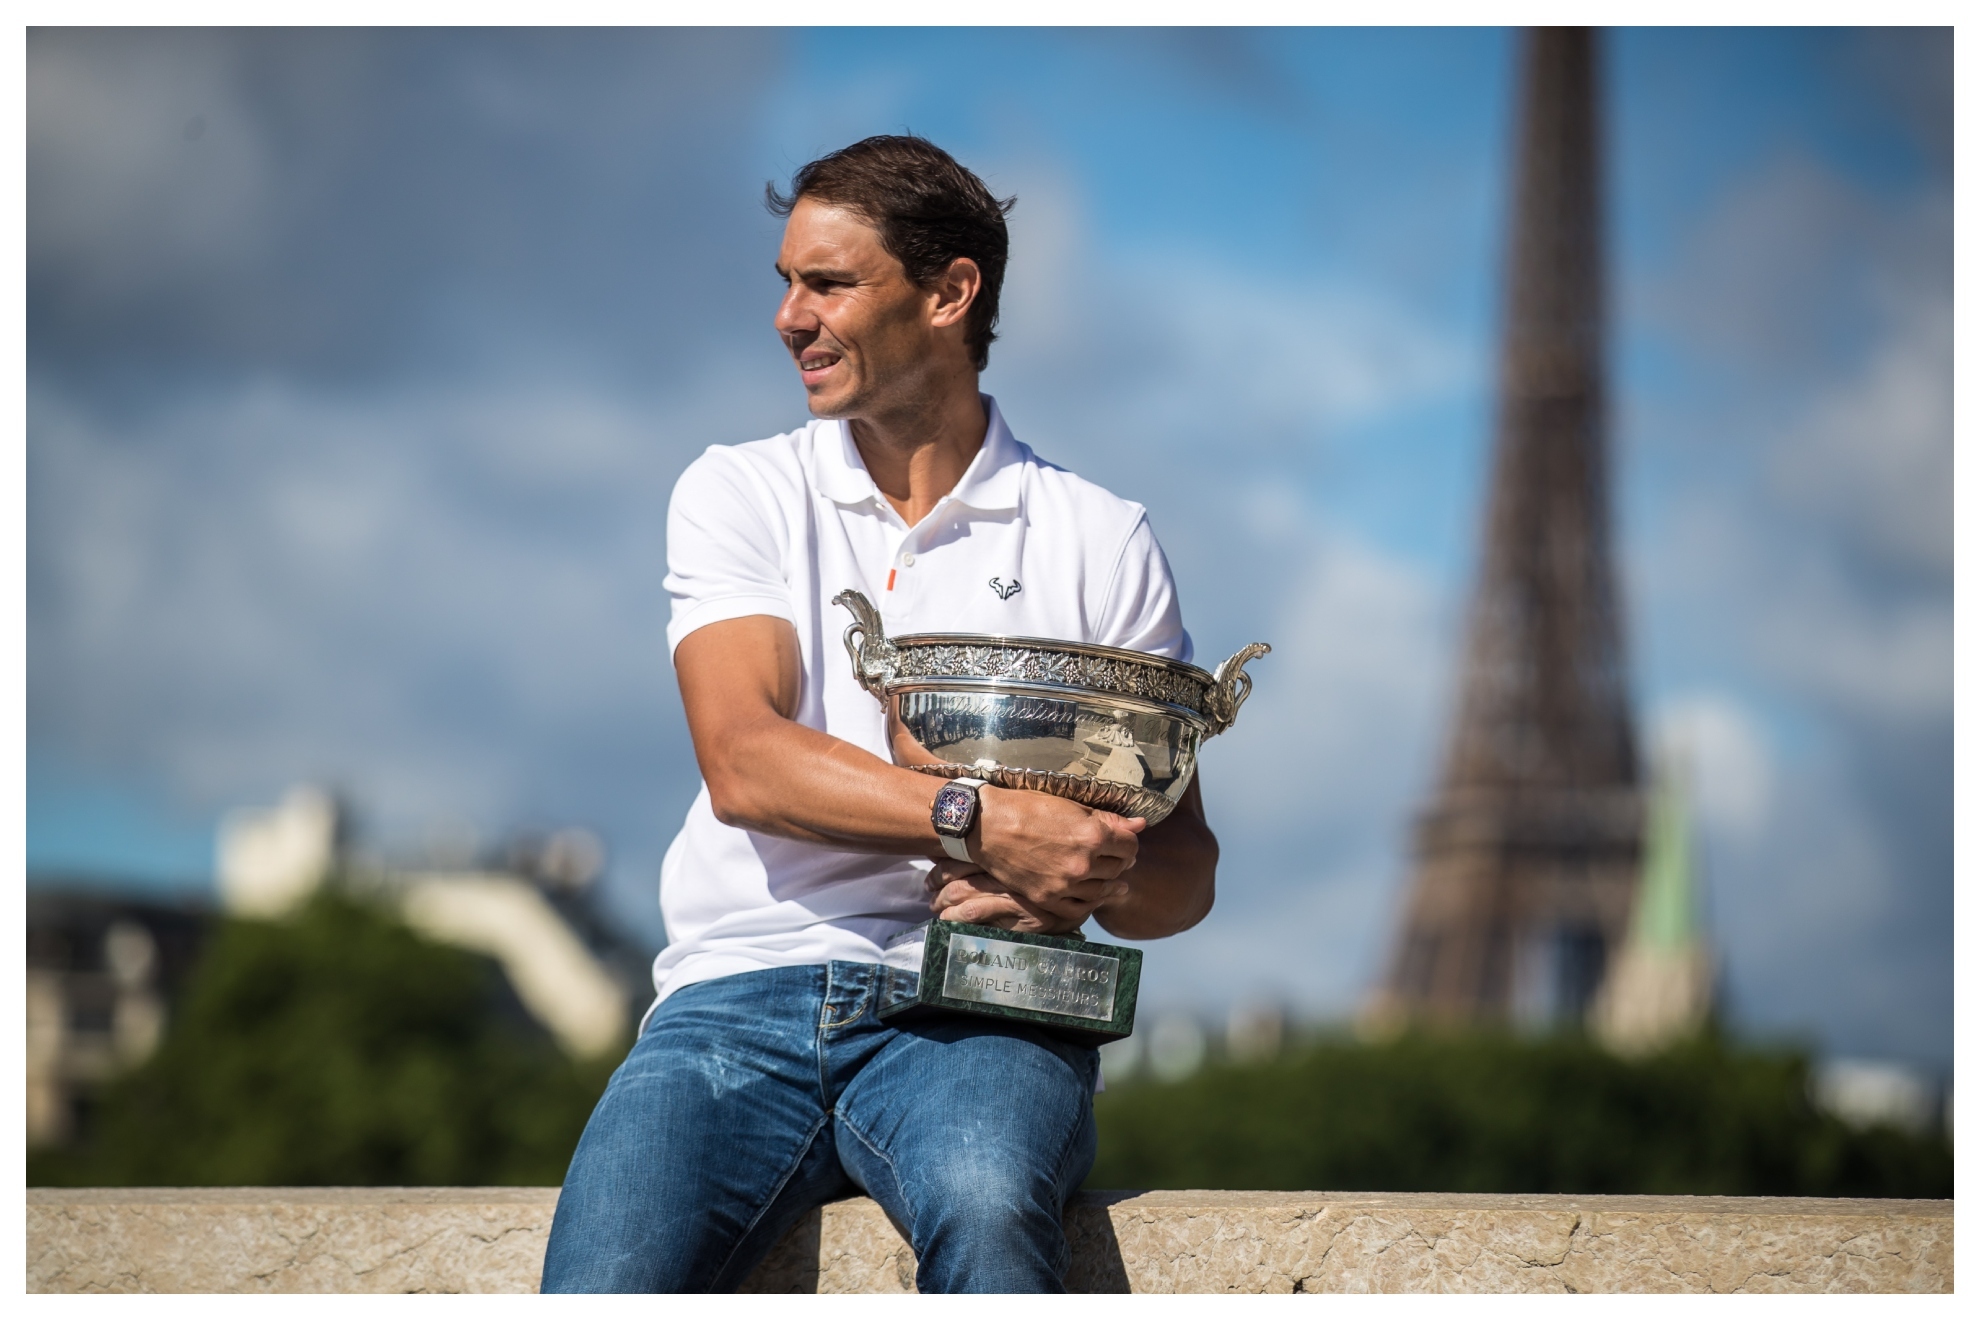 Nadal with the Coupe des Mousquetaires